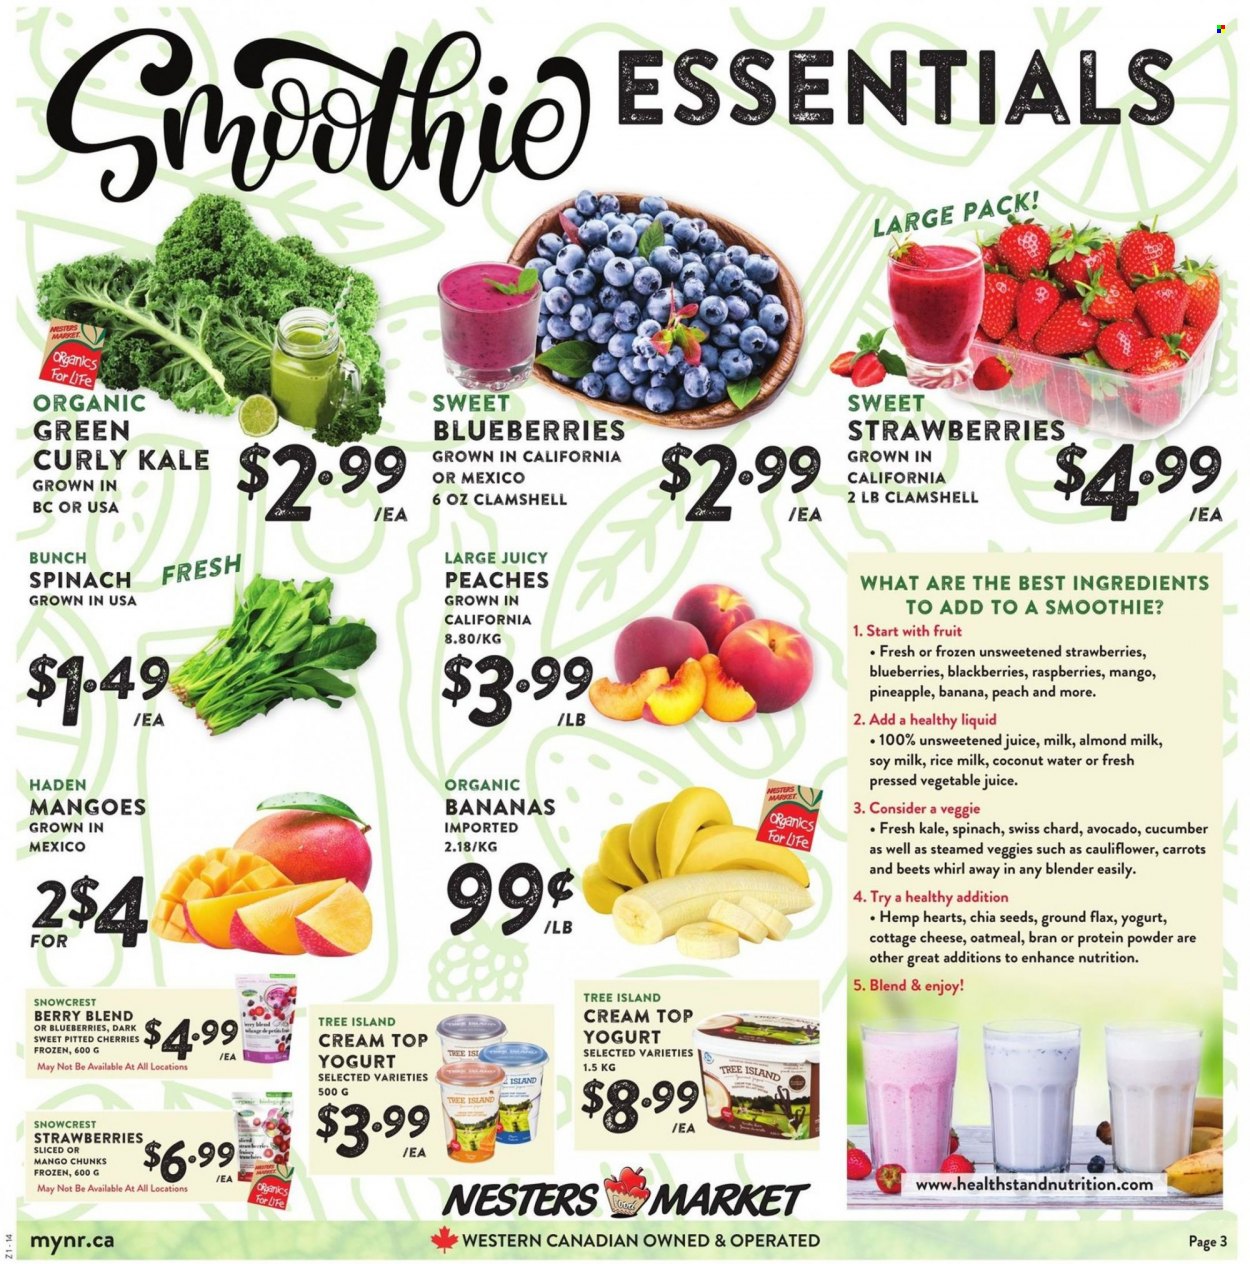 thumbnail - Nesters Food Market Flyer - May 22, 2022 - May 28, 2022 - Sales products - cauliflower, kale, avocado, bananas, blackberries, pineapple, cherries, organic bananas, peaches, cottage cheese, cheese, yoghurt, almond milk, soy milk, oatmeal, chia seeds, juice, coconut water, vegetable juice, rice milk, chard, whey protein. Page 3.